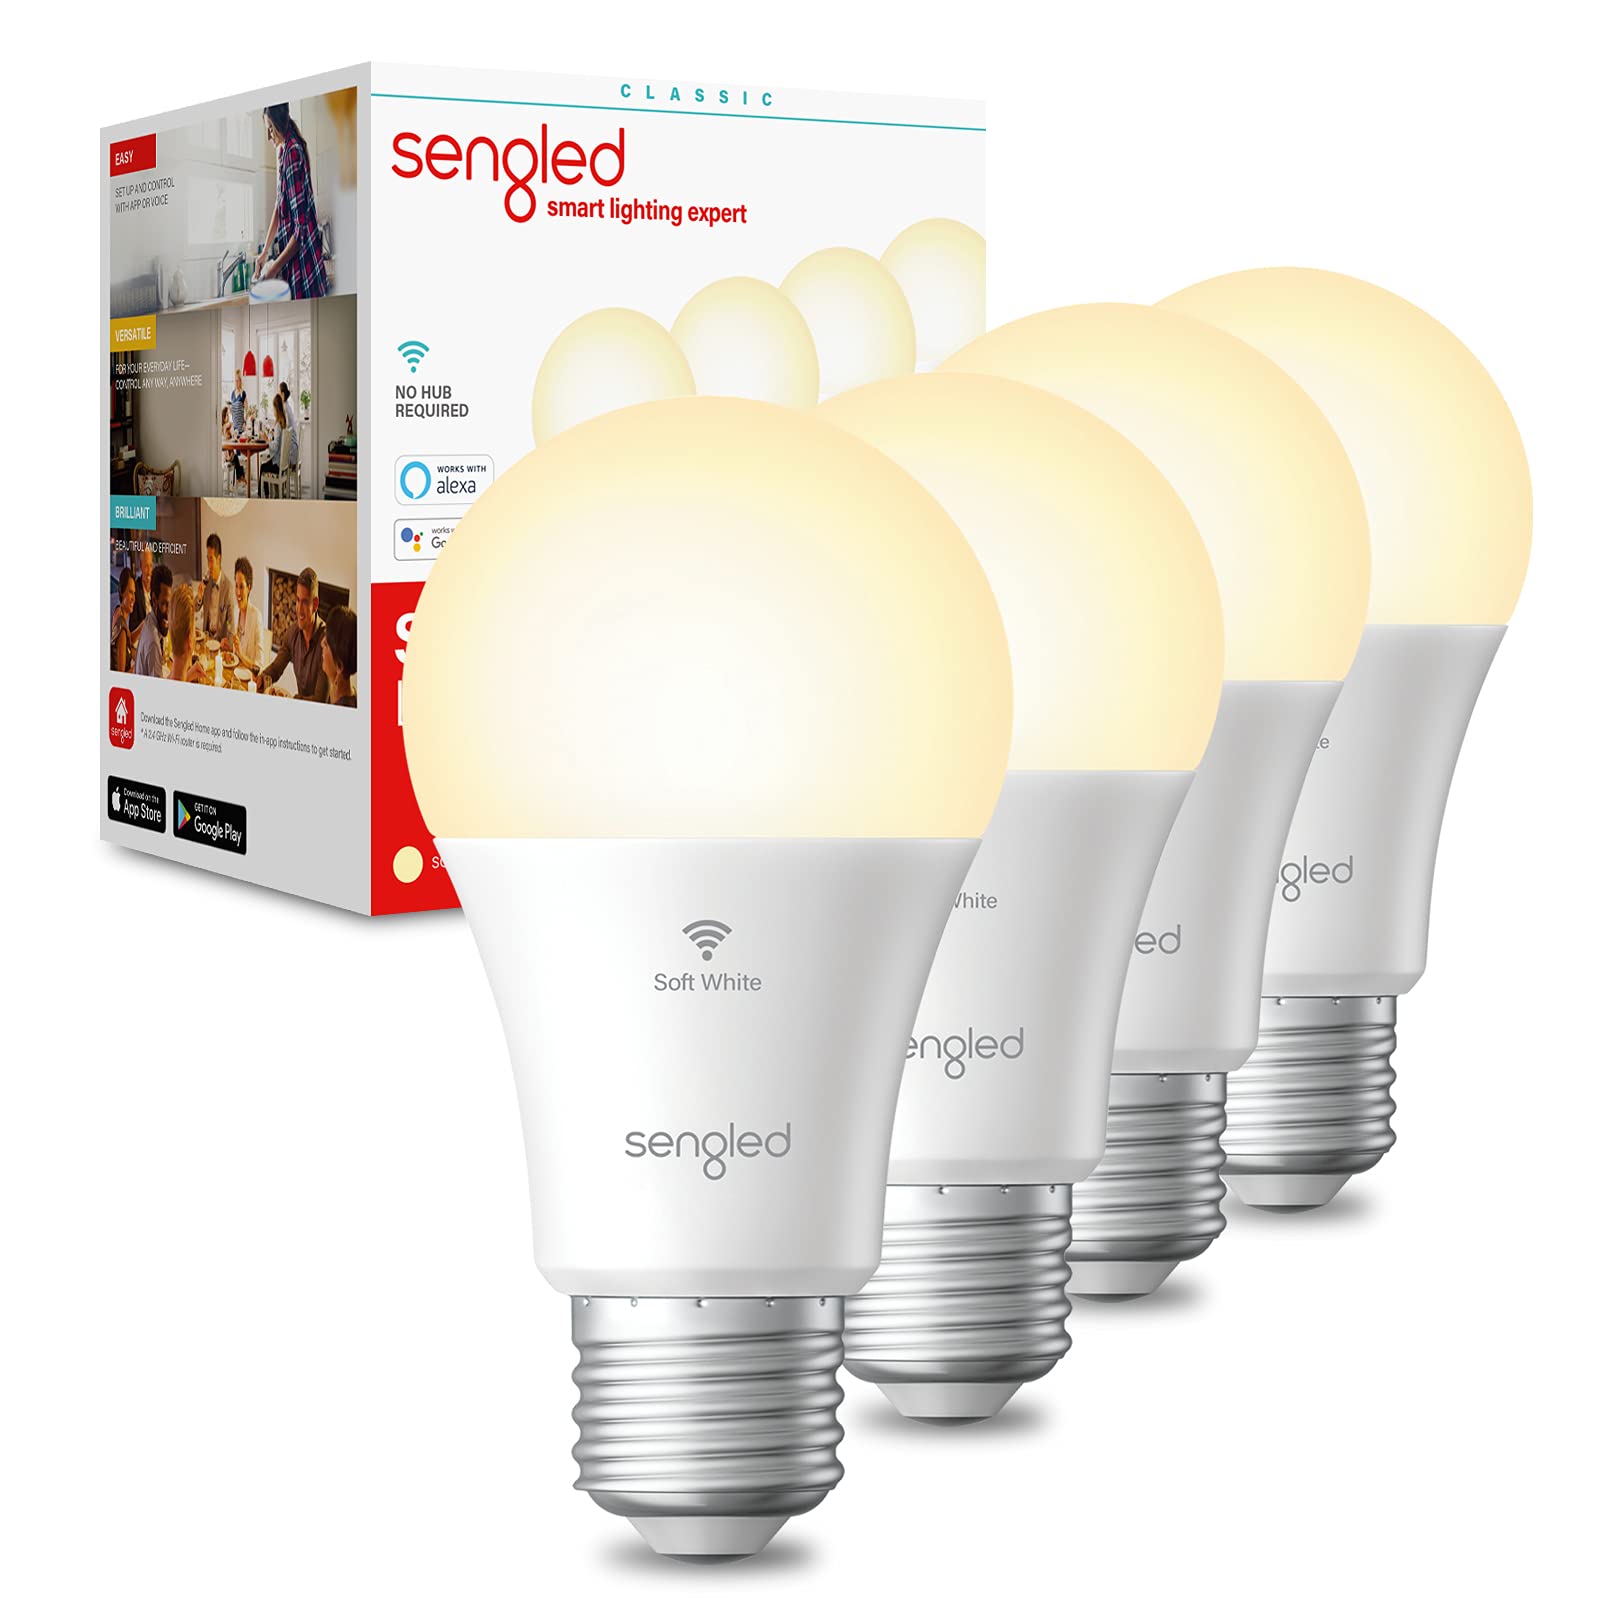 Sengled Alexa Light Bulb,WiFi Light Bulbs,Smart Light Bulbs,Smart Bulbs that Work with Alexa & Google Assistant,A19 Soft White(2700K)No Hub Required,800LM 60W Equivalent HighCRI90,4Count(Pack of 1)